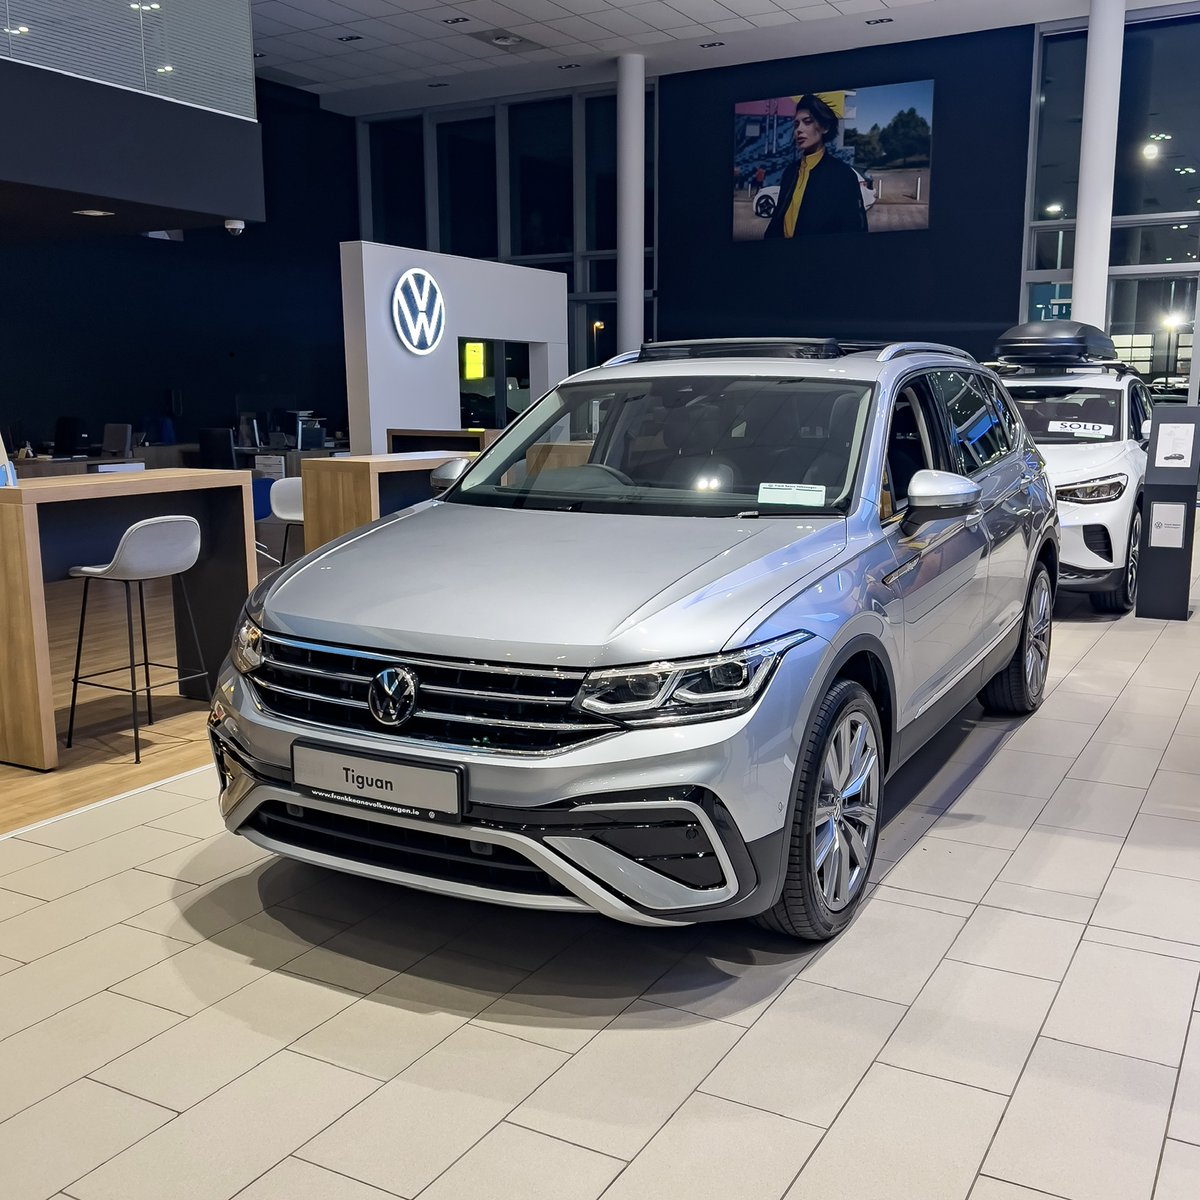 What do we think of the spec on our brand new Tiguan Allspace Pyrite Silver paired with a set of 20” Kapstadt Alloy Wheels A tasteful combination that would look good on any driveway To learn more about the Tiguan click on the link below bit.ly/47OHdxm #frankkeanevw